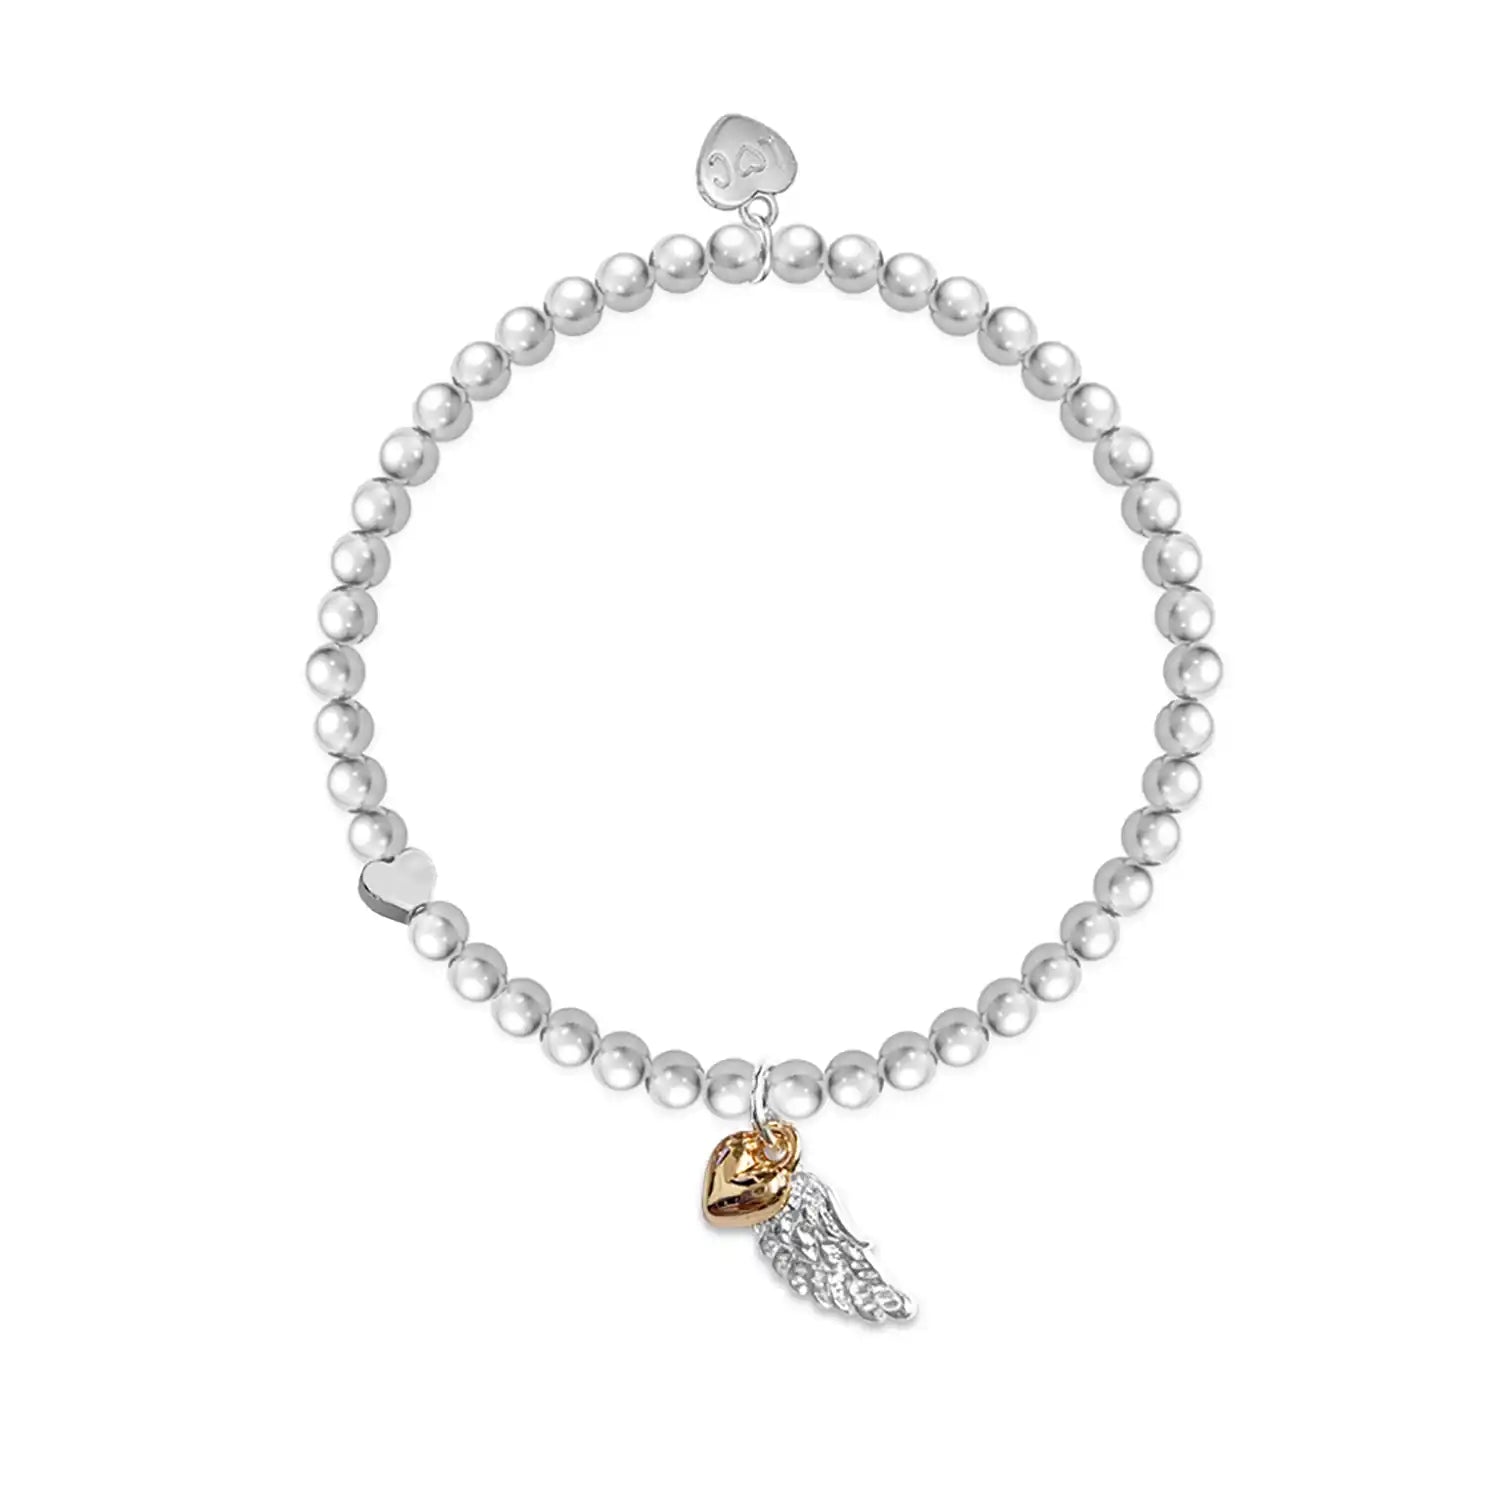 Life Charms Guardian Angel Bracelet - Silver 1 Shaws Department Stores